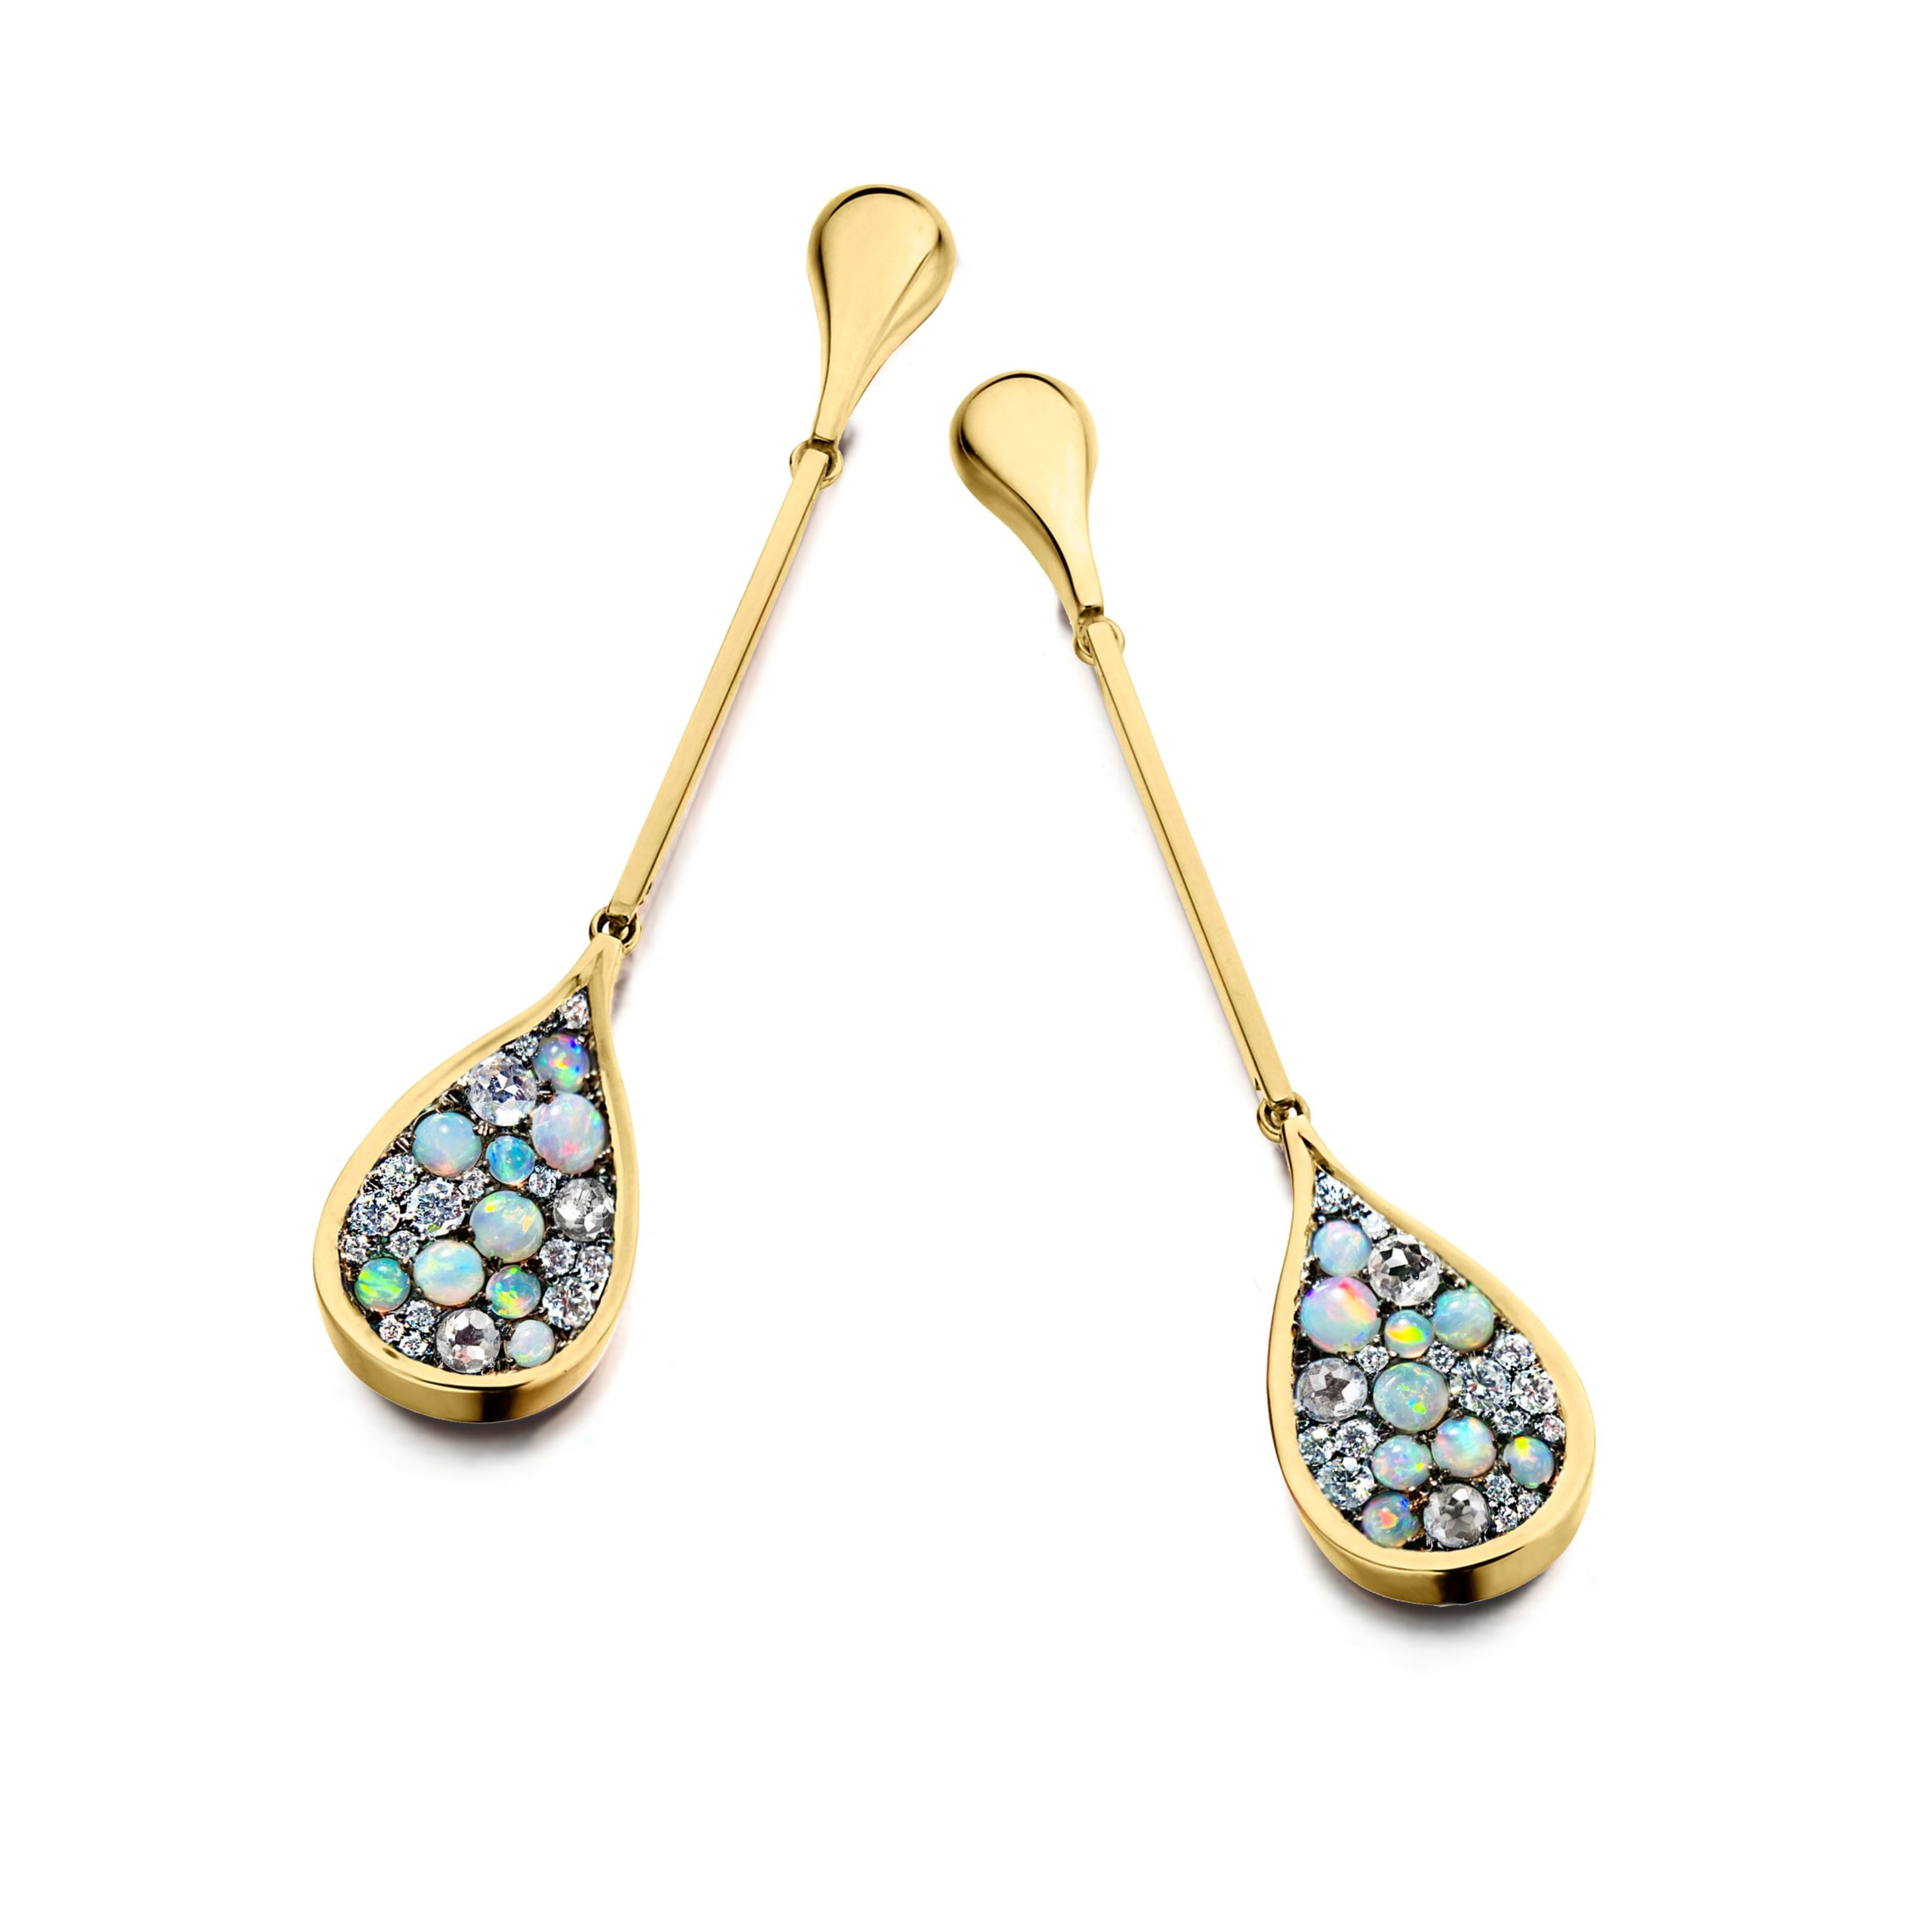 Earrings with Australian white opal cabochons and translucent clear diamonds.